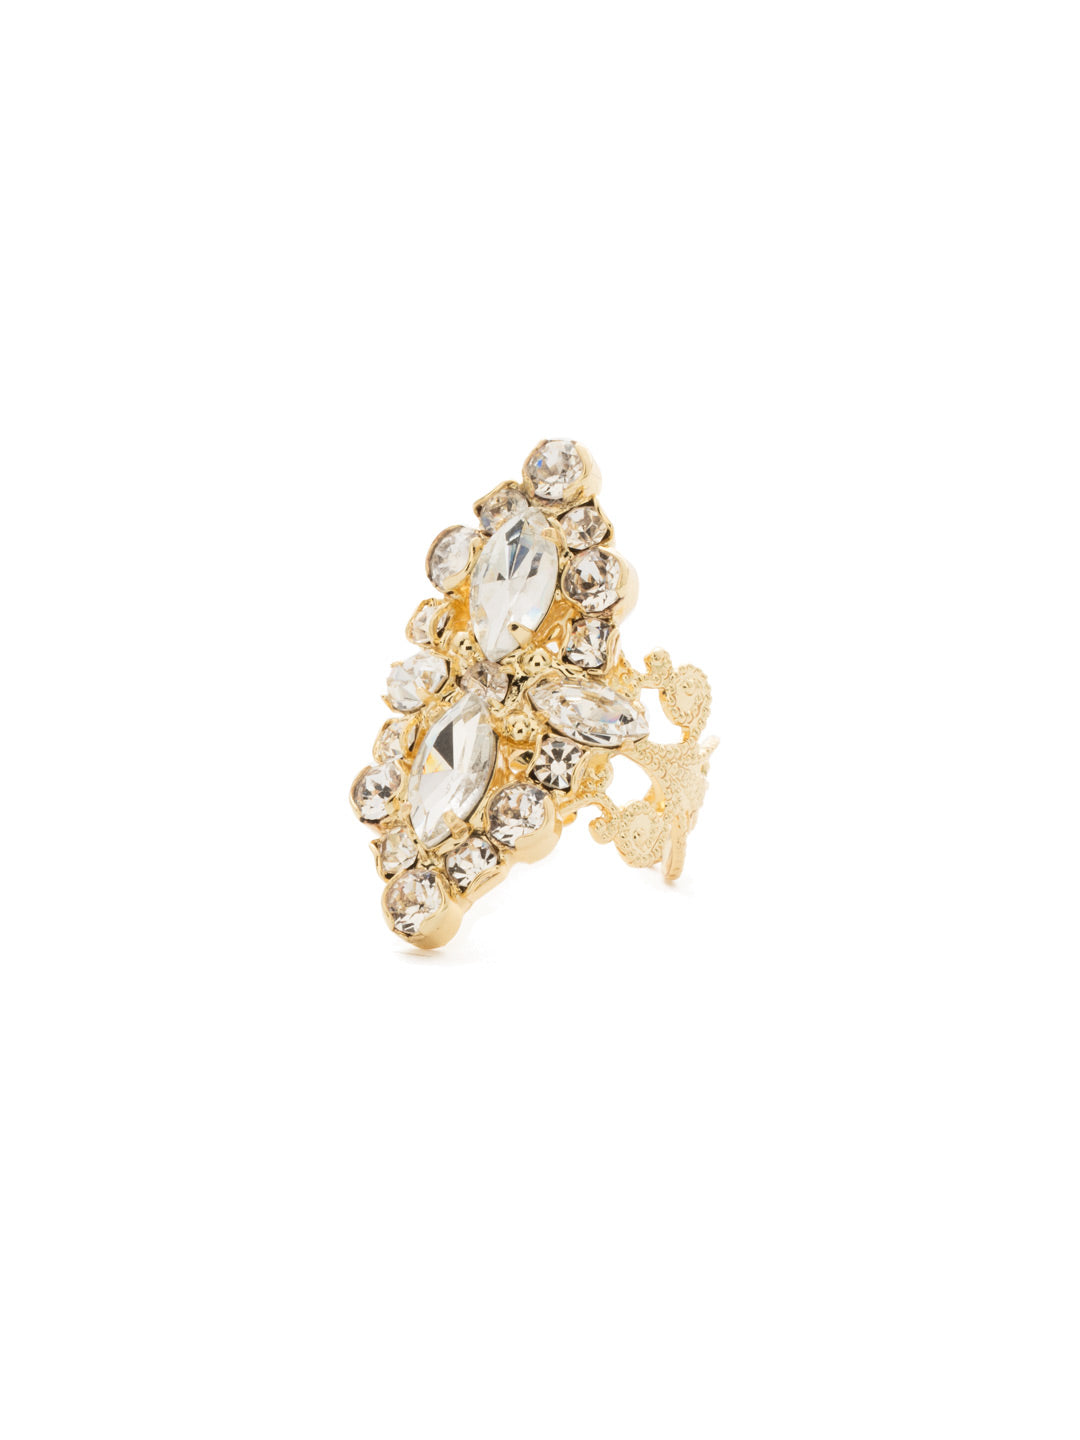 Edelweiss Ring - RDQ30BGCRY - <p>This elongated silhouette incorporates marquise and round-cut crystals in a vintage-inspired design. From Sorrelli's Crystal collection in our Bright Gold-tone finish.</p>